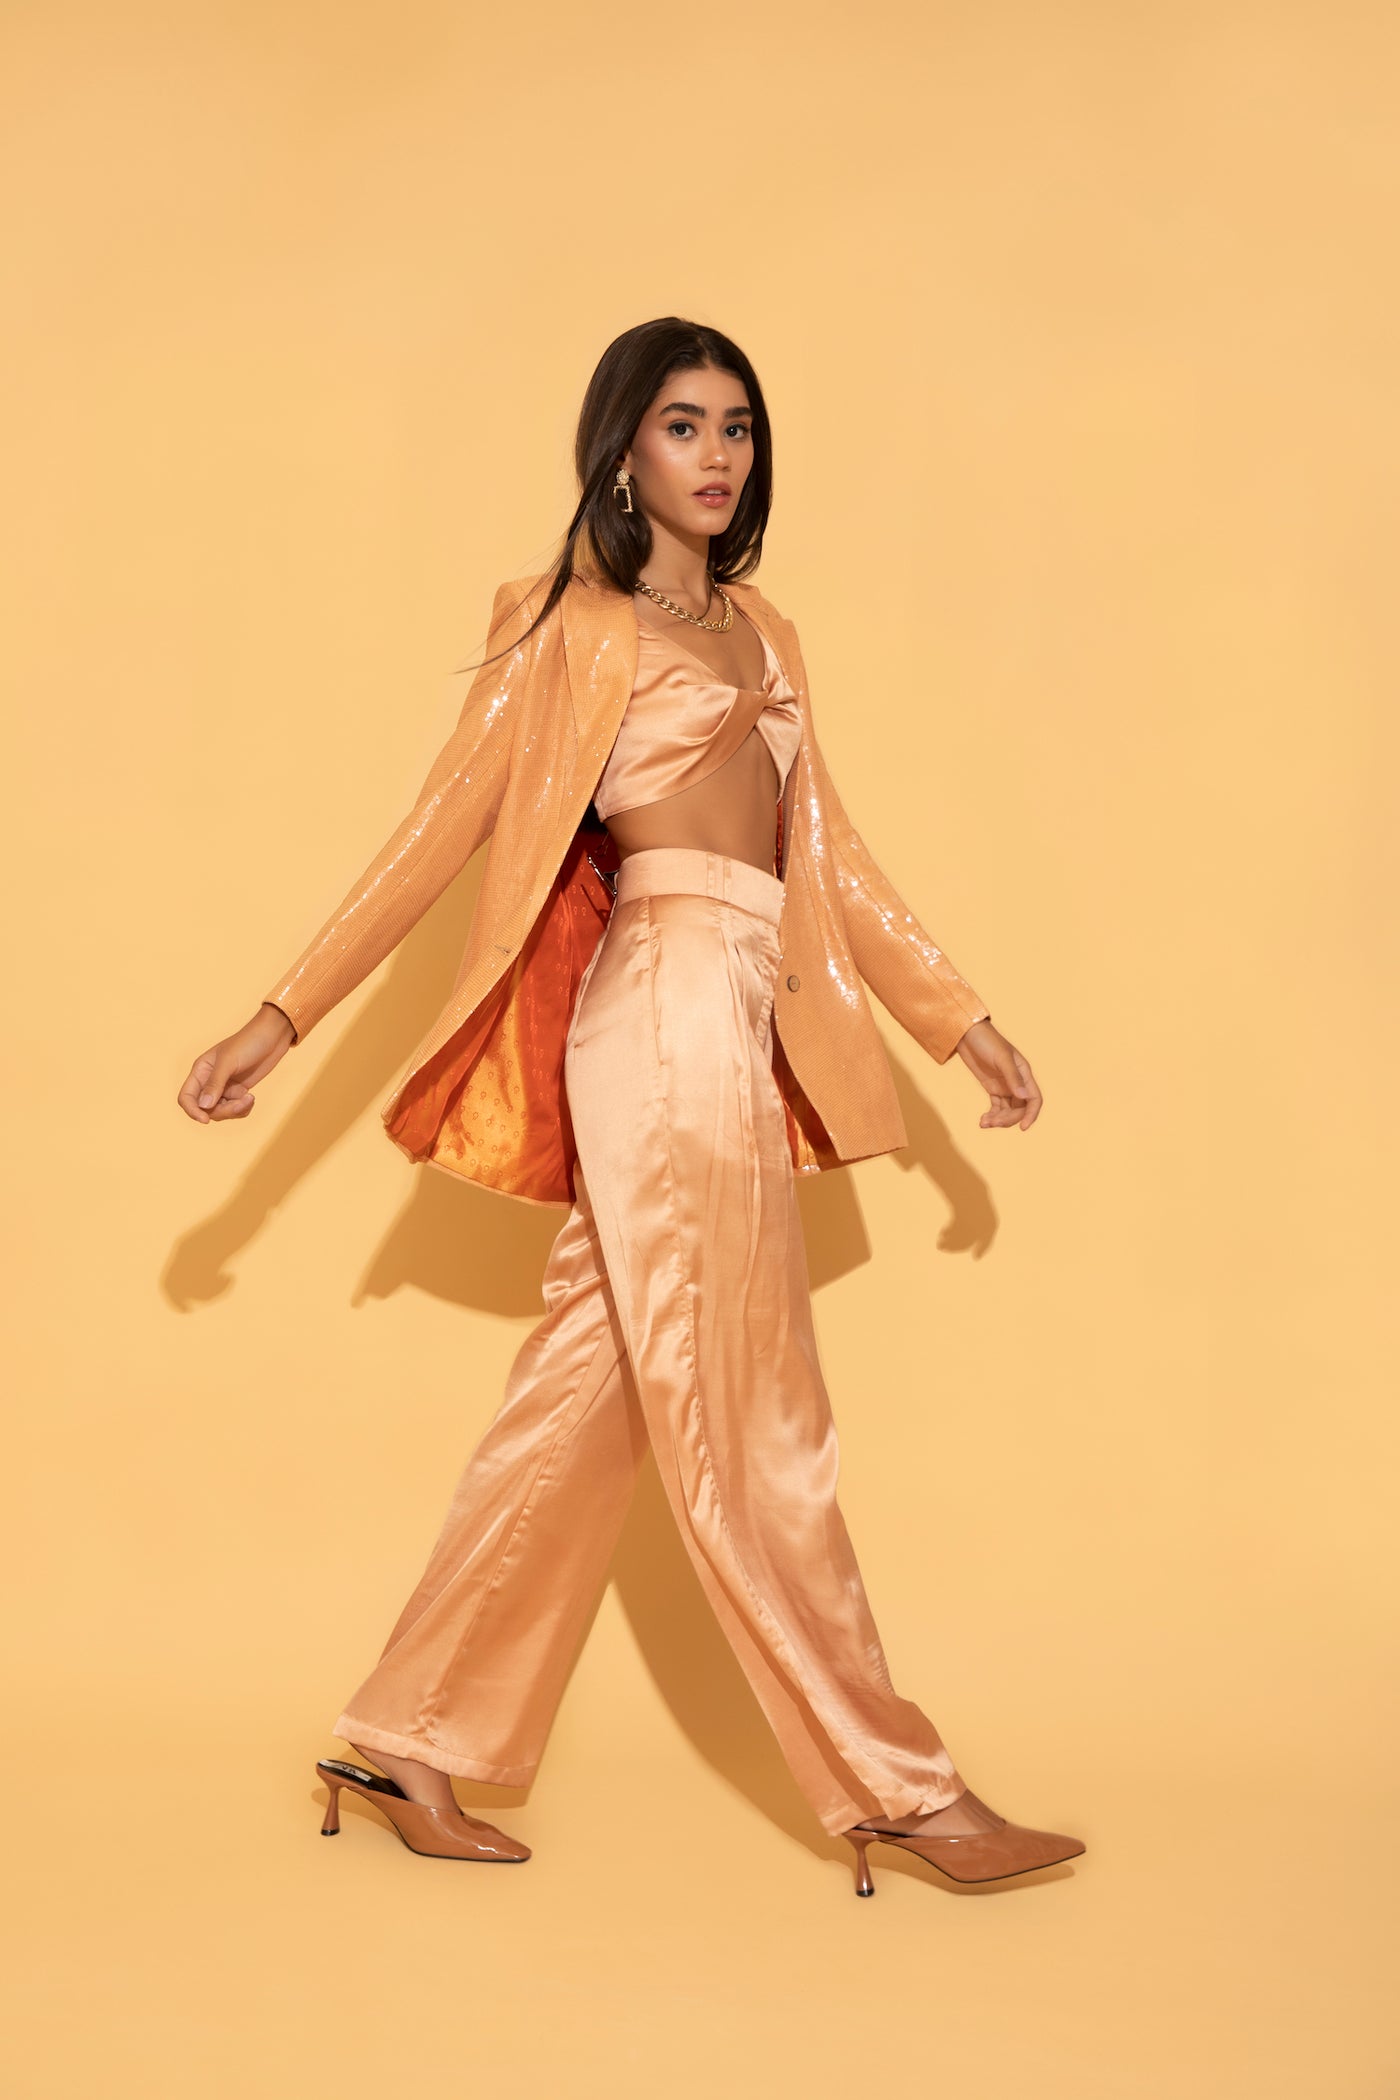 The dazzling peach set from Torqadorn, featuring sequins blazer, crop top and satin pants.